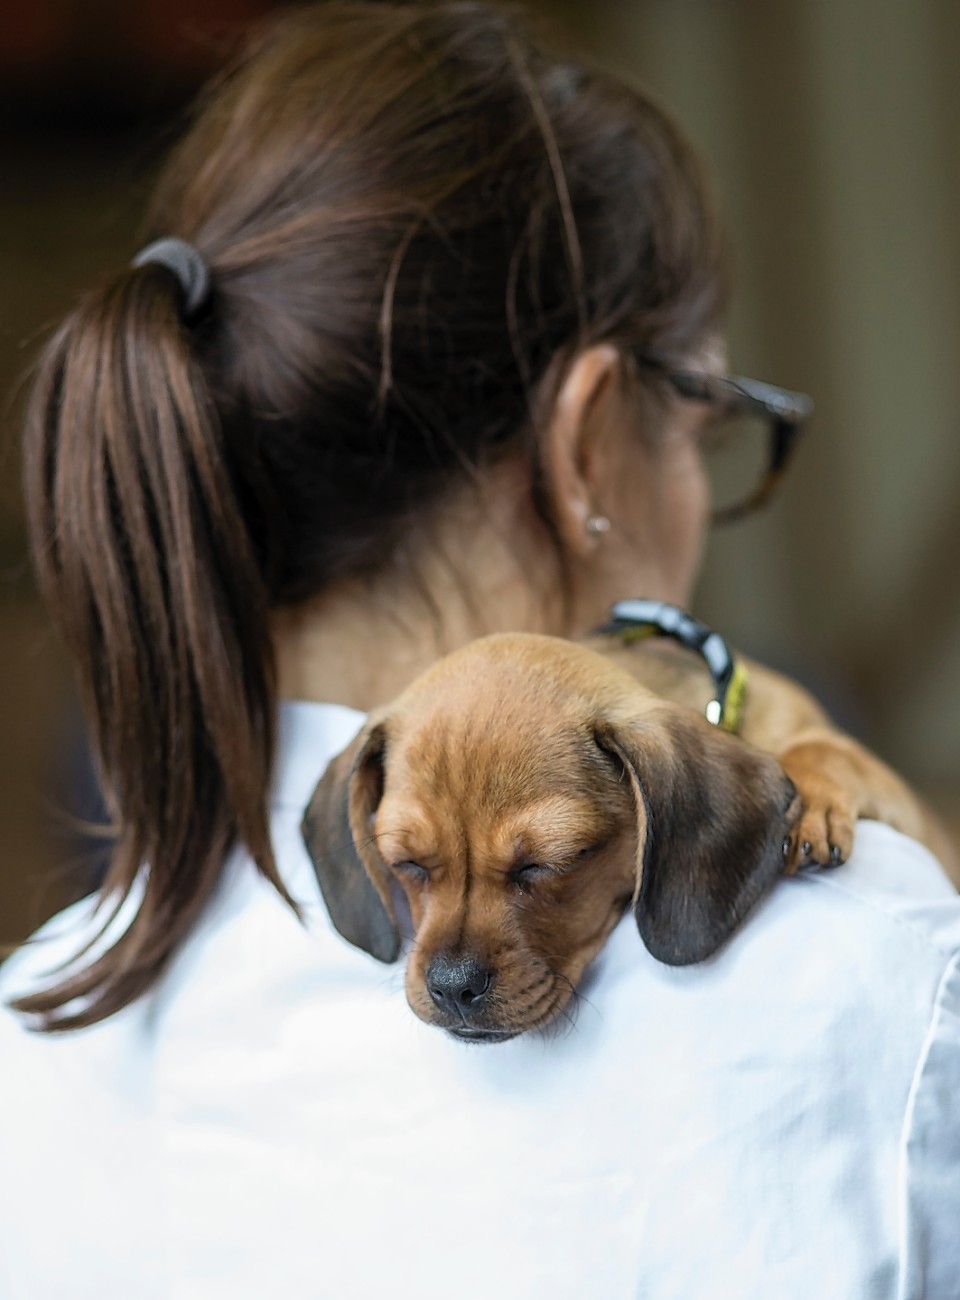 Many pet owners underestimate veterinary treatment costs